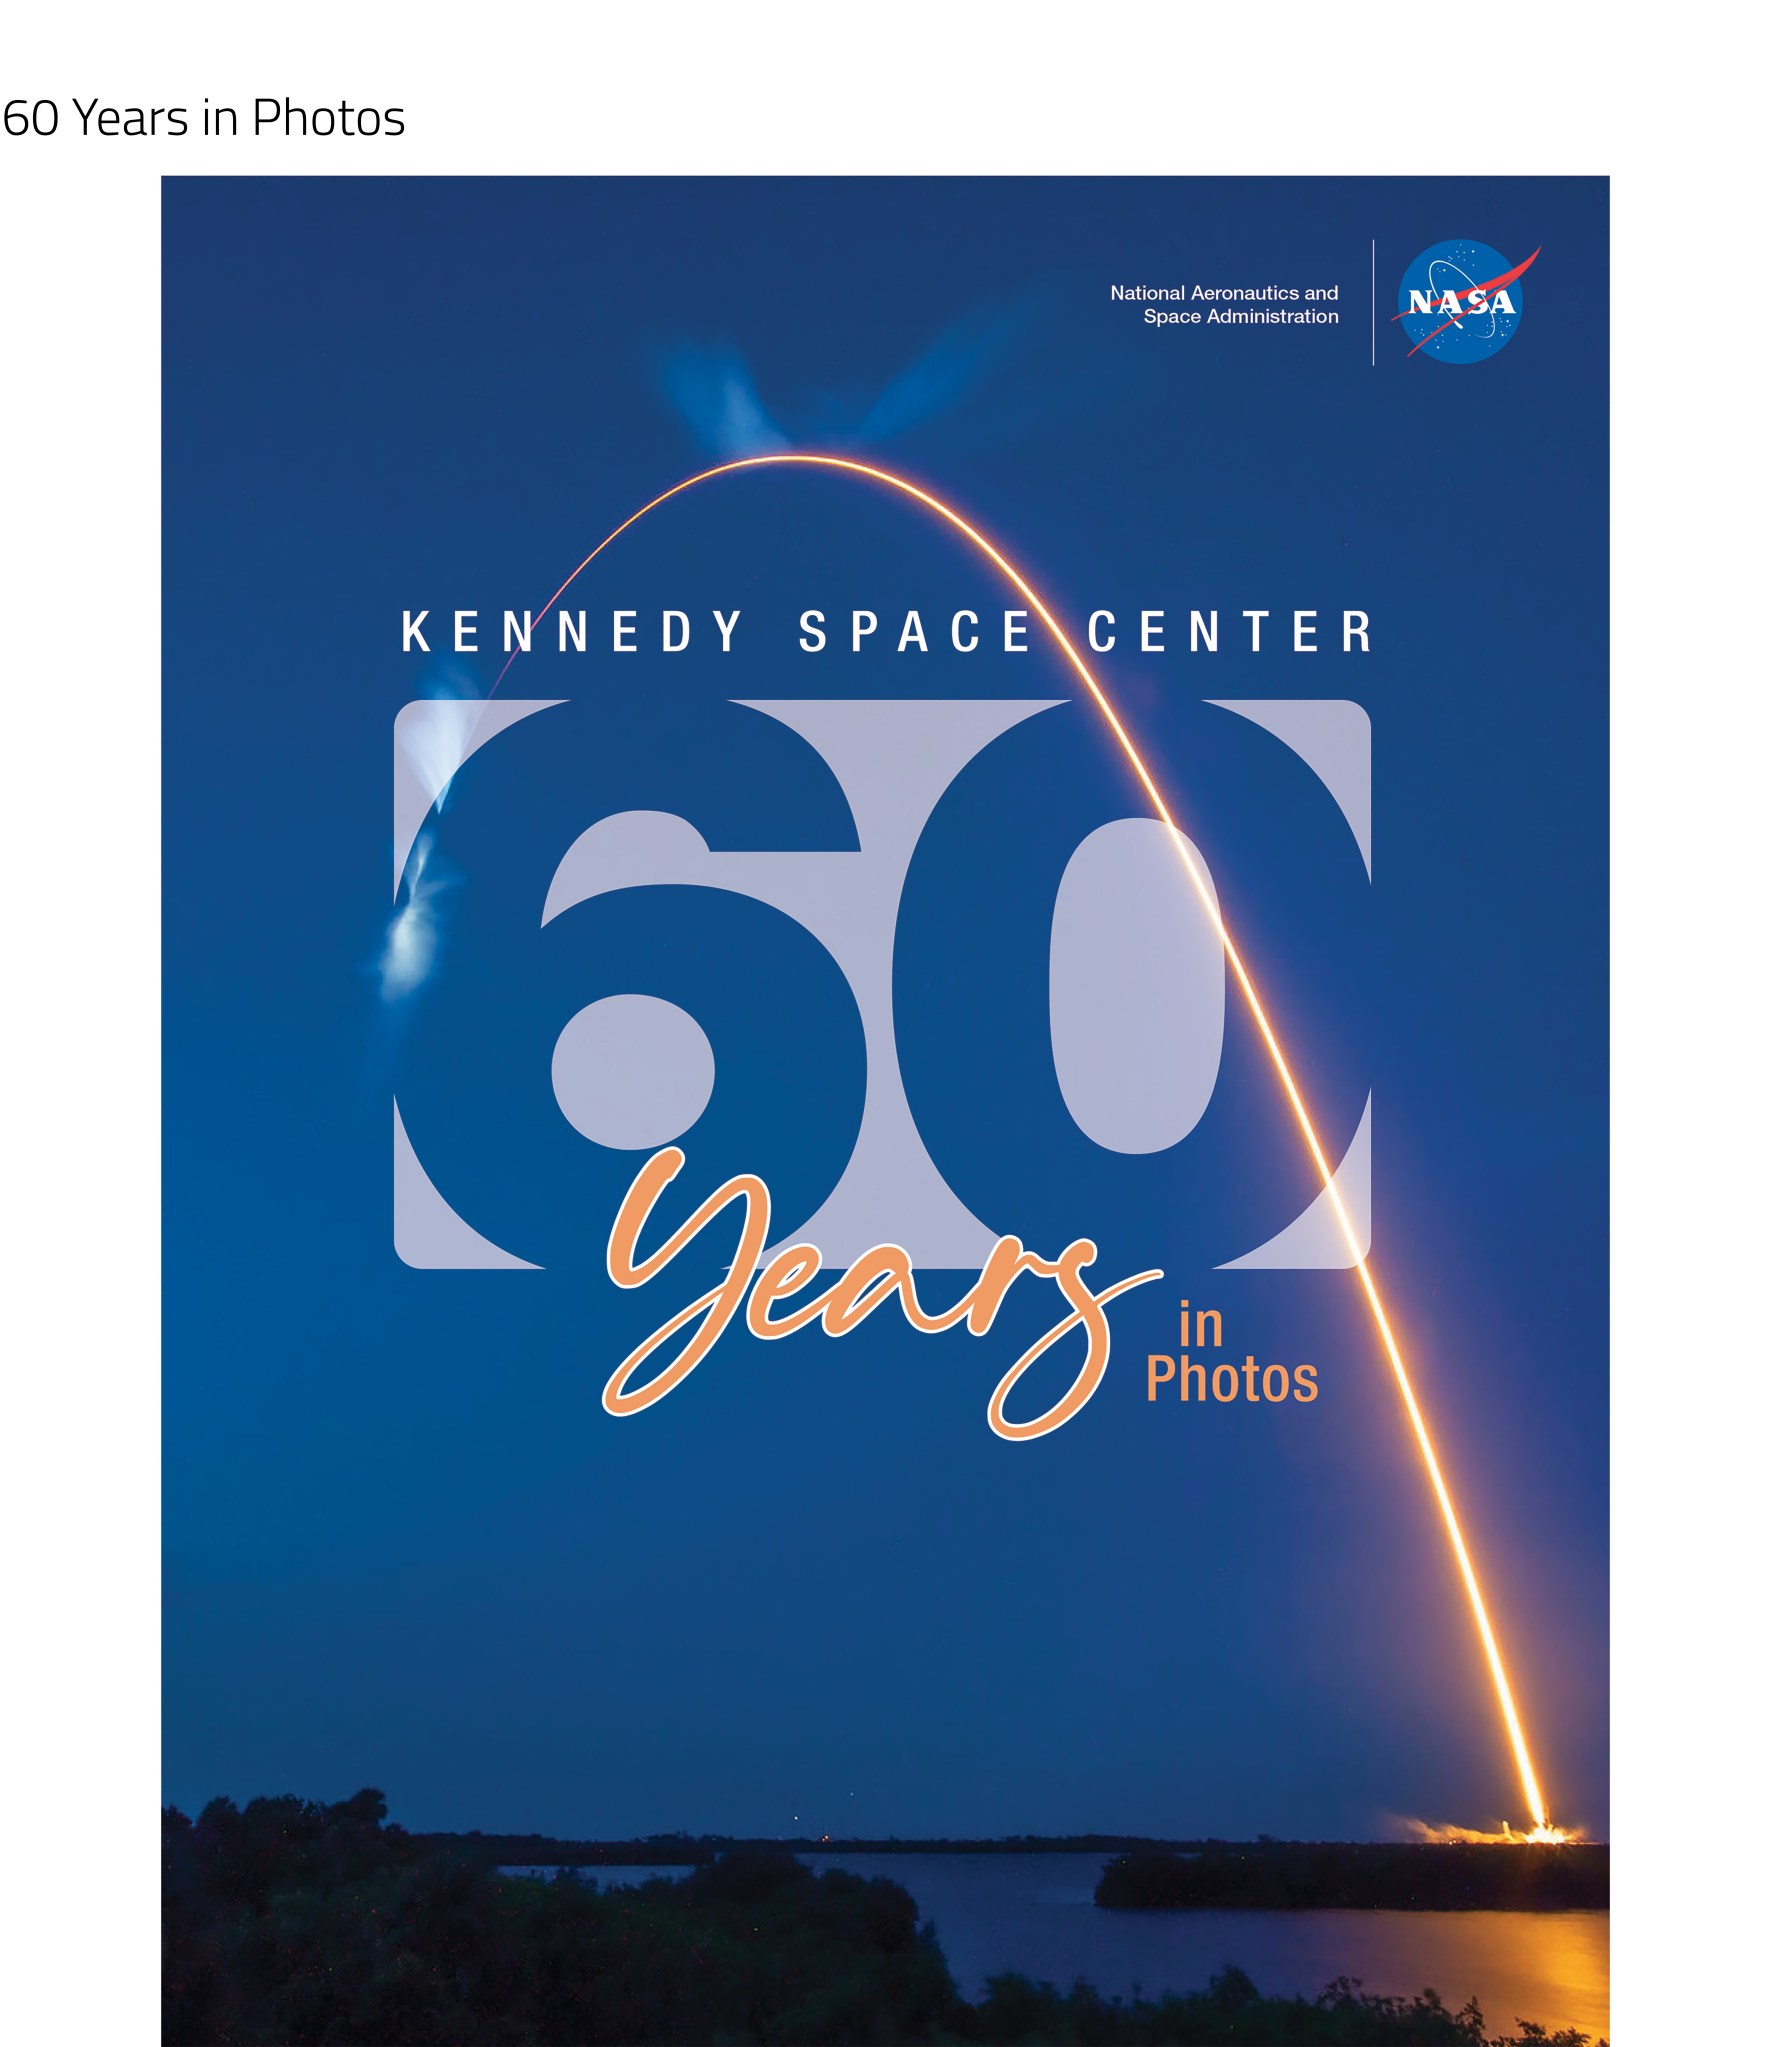 The cover of Kennedy Space Center's